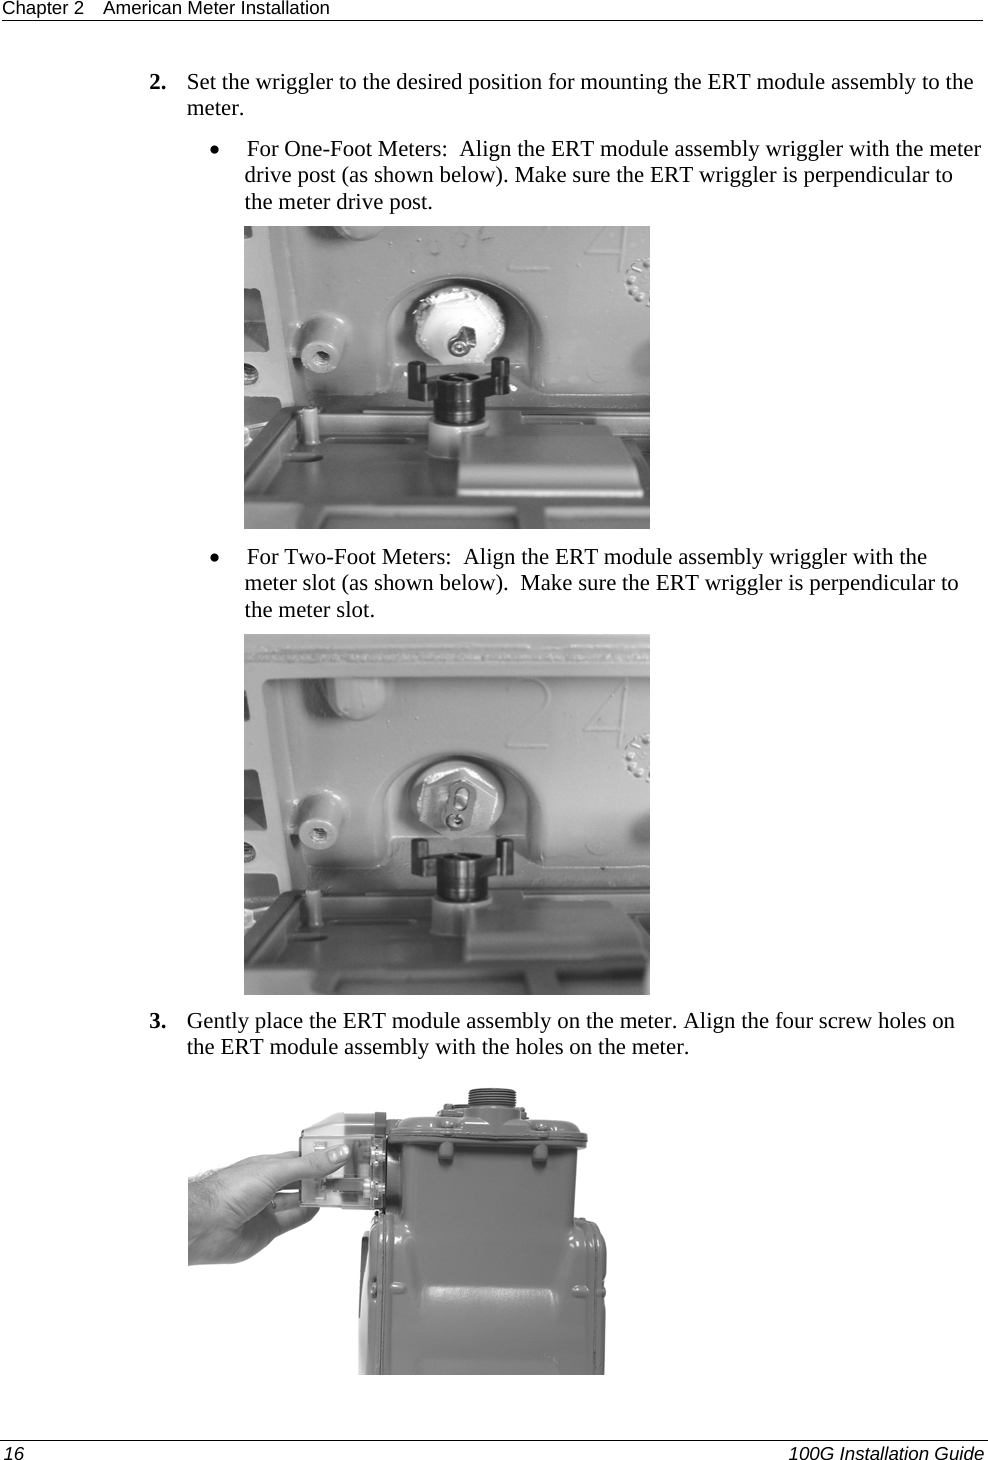 Chapter 2  American Meter Installation  2. Set the wriggler to the desired position for mounting the ERT module assembly to the meter.  • For One-Foot Meters:  Align the ERT module assembly wriggler with the meter drive post (as shown below). Make sure the ERT wriggler is perpendicular to the meter drive post.   • For Two-Foot Meters:  Align the ERT module assembly wriggler with the meter slot (as shown below).  Make sure the ERT wriggler is perpendicular to the meter slot.  3. Gently place the ERT module assembly on the meter. Align the four screw holes on the ERT module assembly with the holes on the meter.   1 2 16   100G Installation Guide  